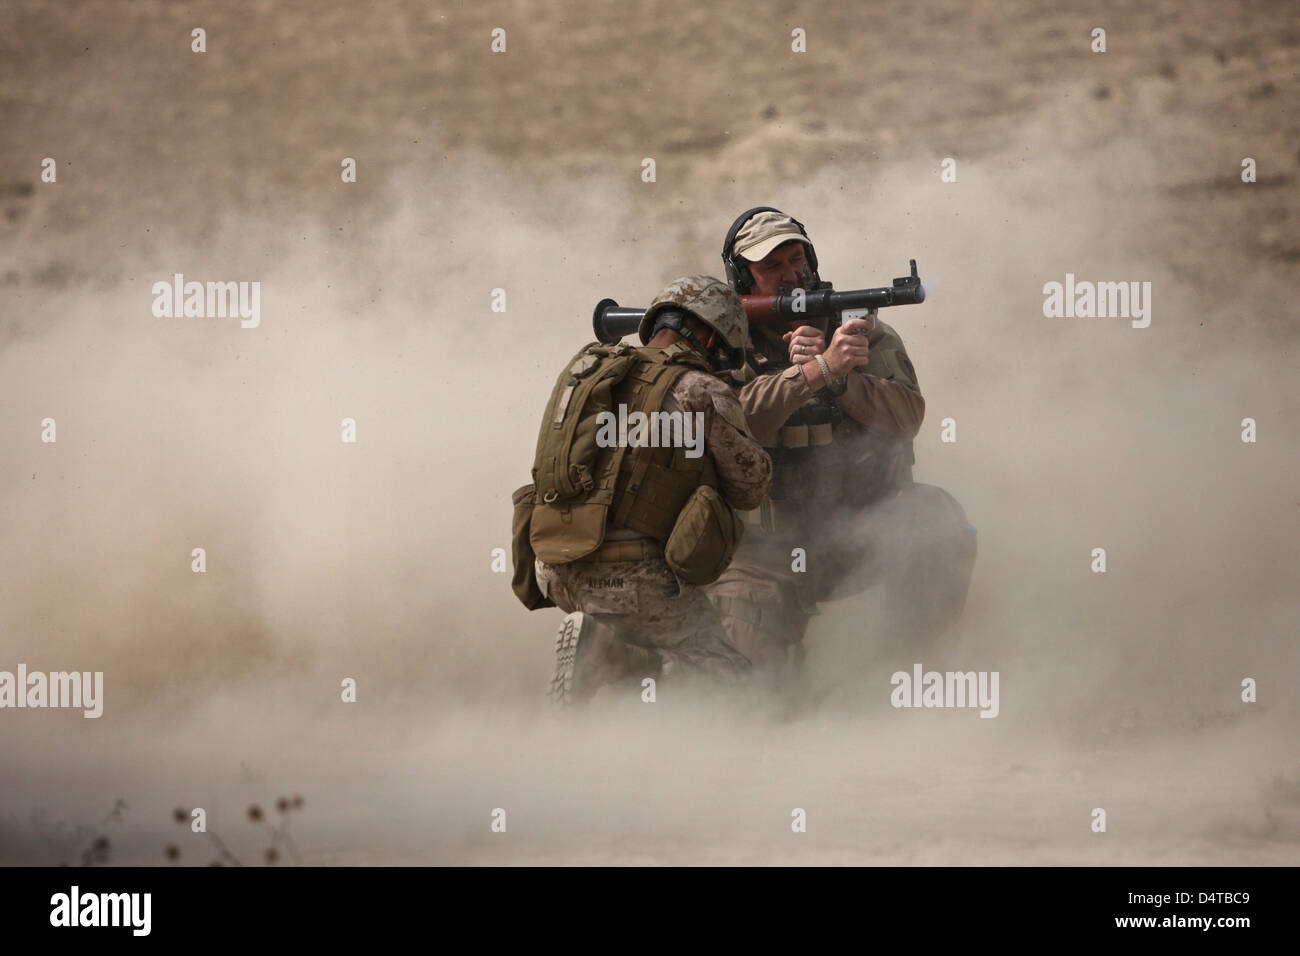 U.S. Marine fires an HE fragmentation round from the RPG-7 rocket-propelled grenade launcher in a wadi near Kunduz, Afghanistan. Stock Photo